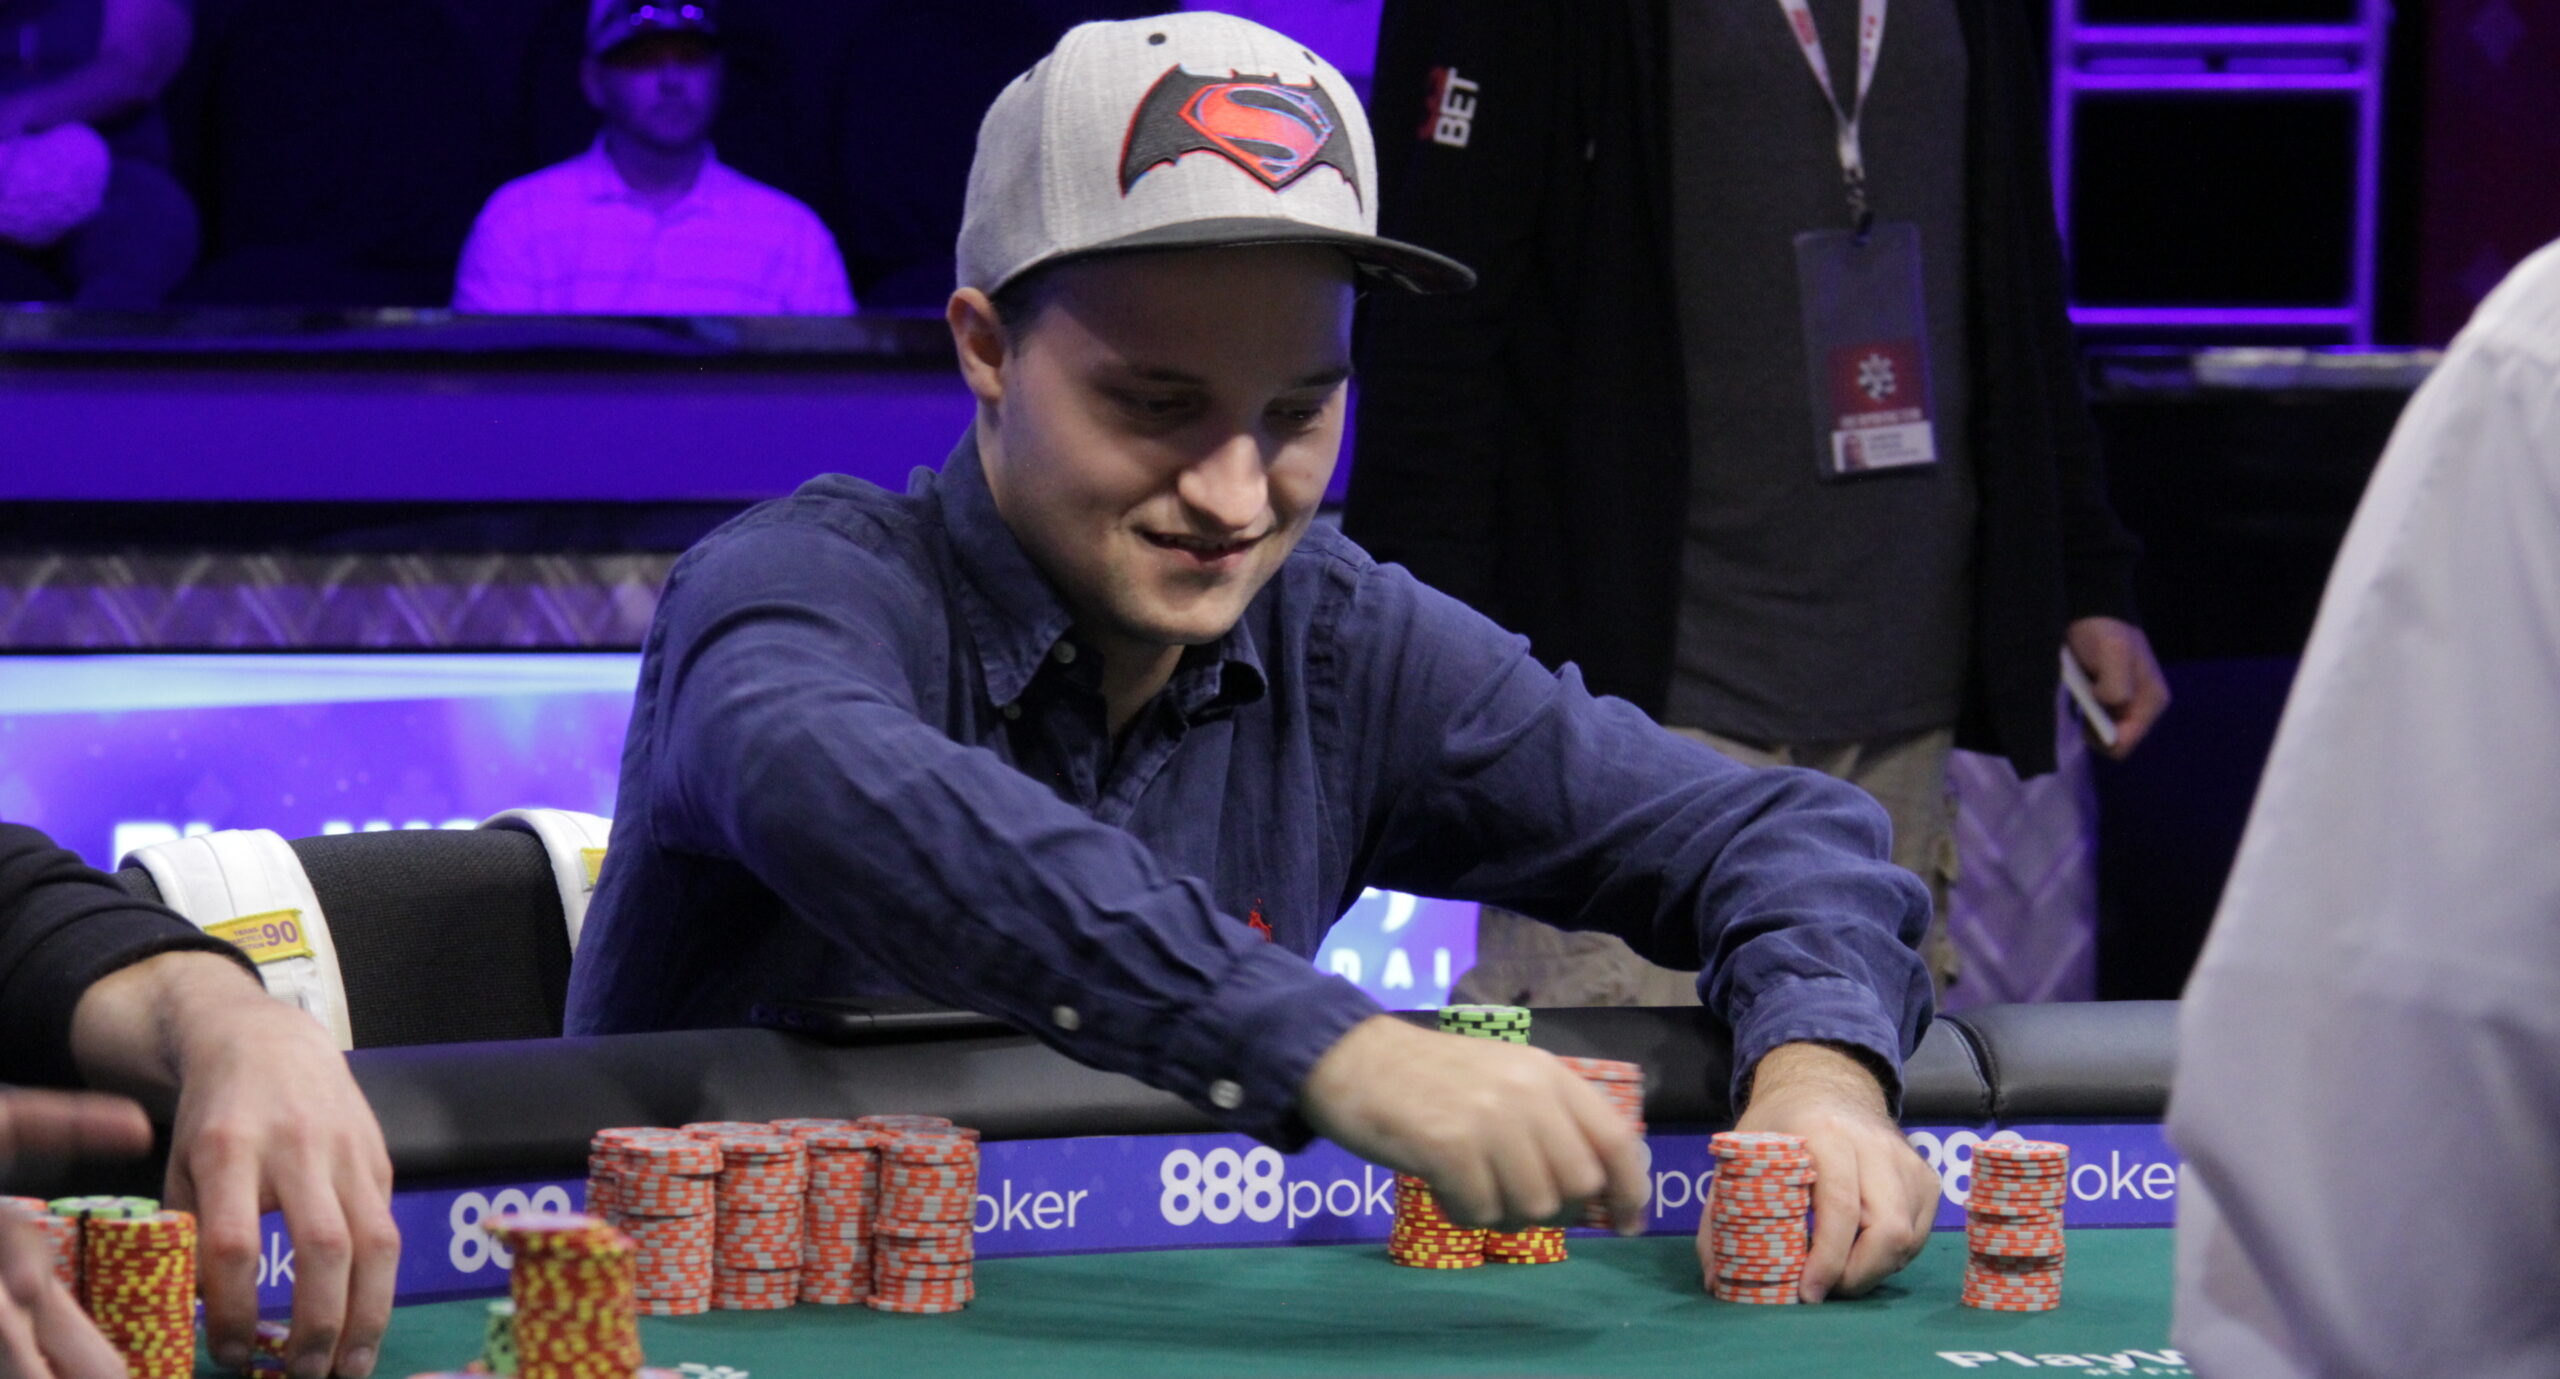 Ryan Laplante, Team CardsChat Take on WSOP Colossus with Last Longer Prize Sweetening the Pot